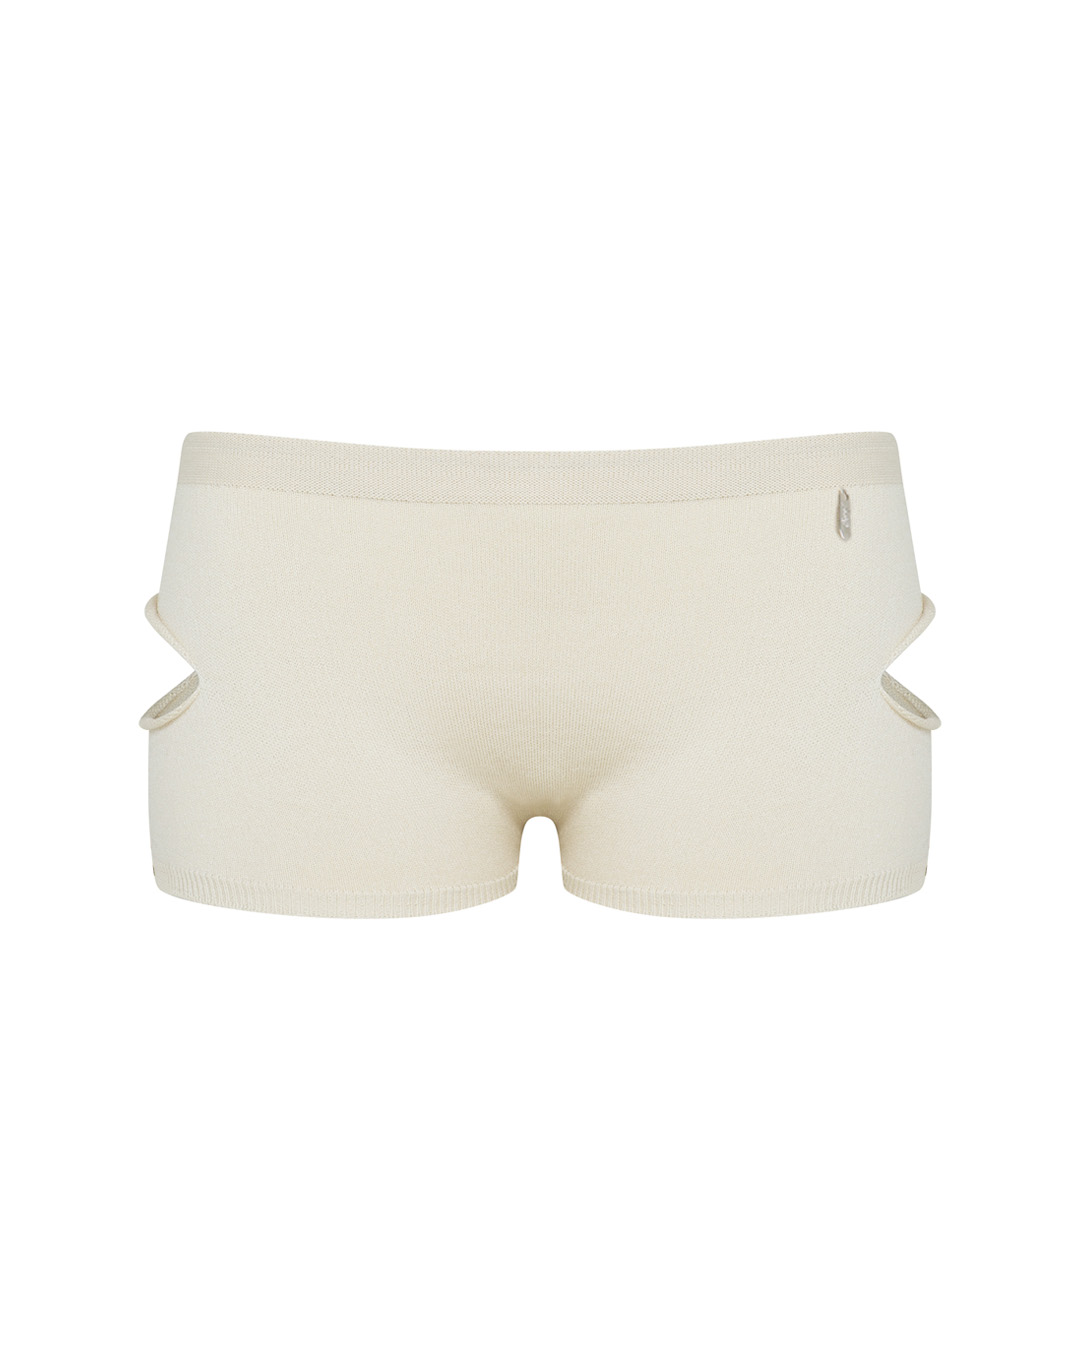 LOW WAIST BRIEF IN POLY / CREAM